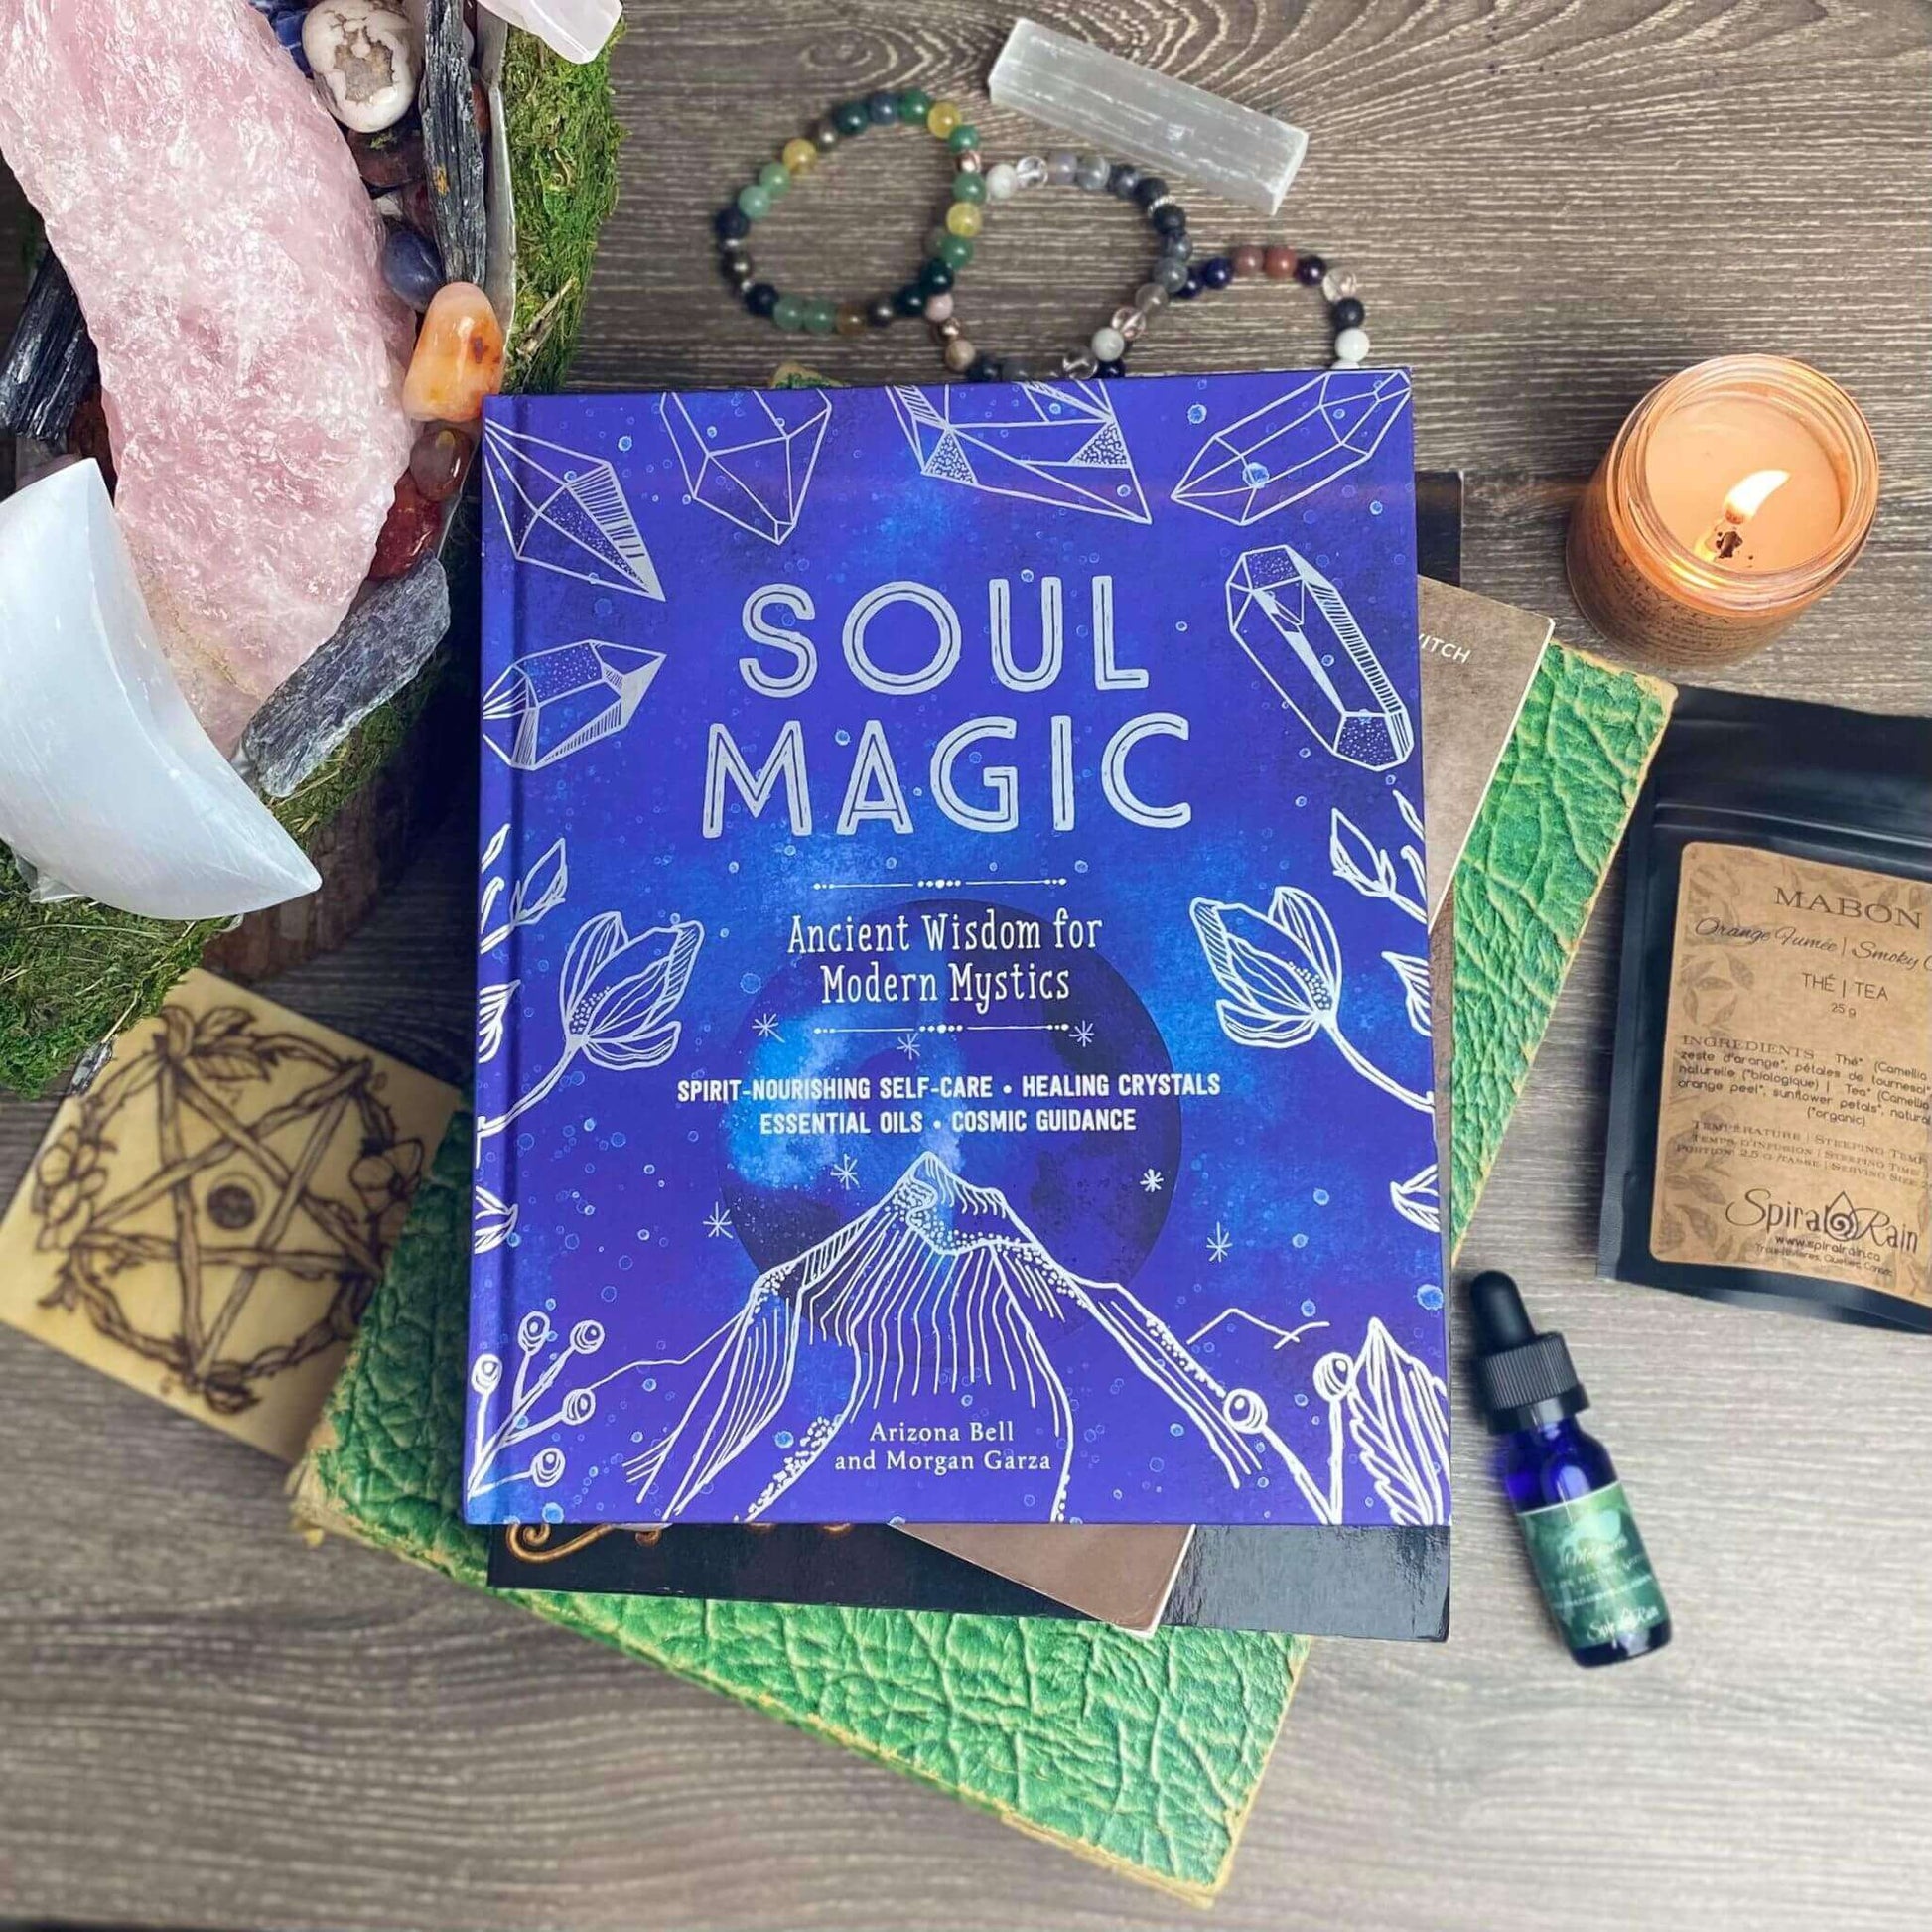 SOUL MAGIC: ANCIENT WISDOM FOR MODERN MYSTICS at $24 only from Spiral Rain